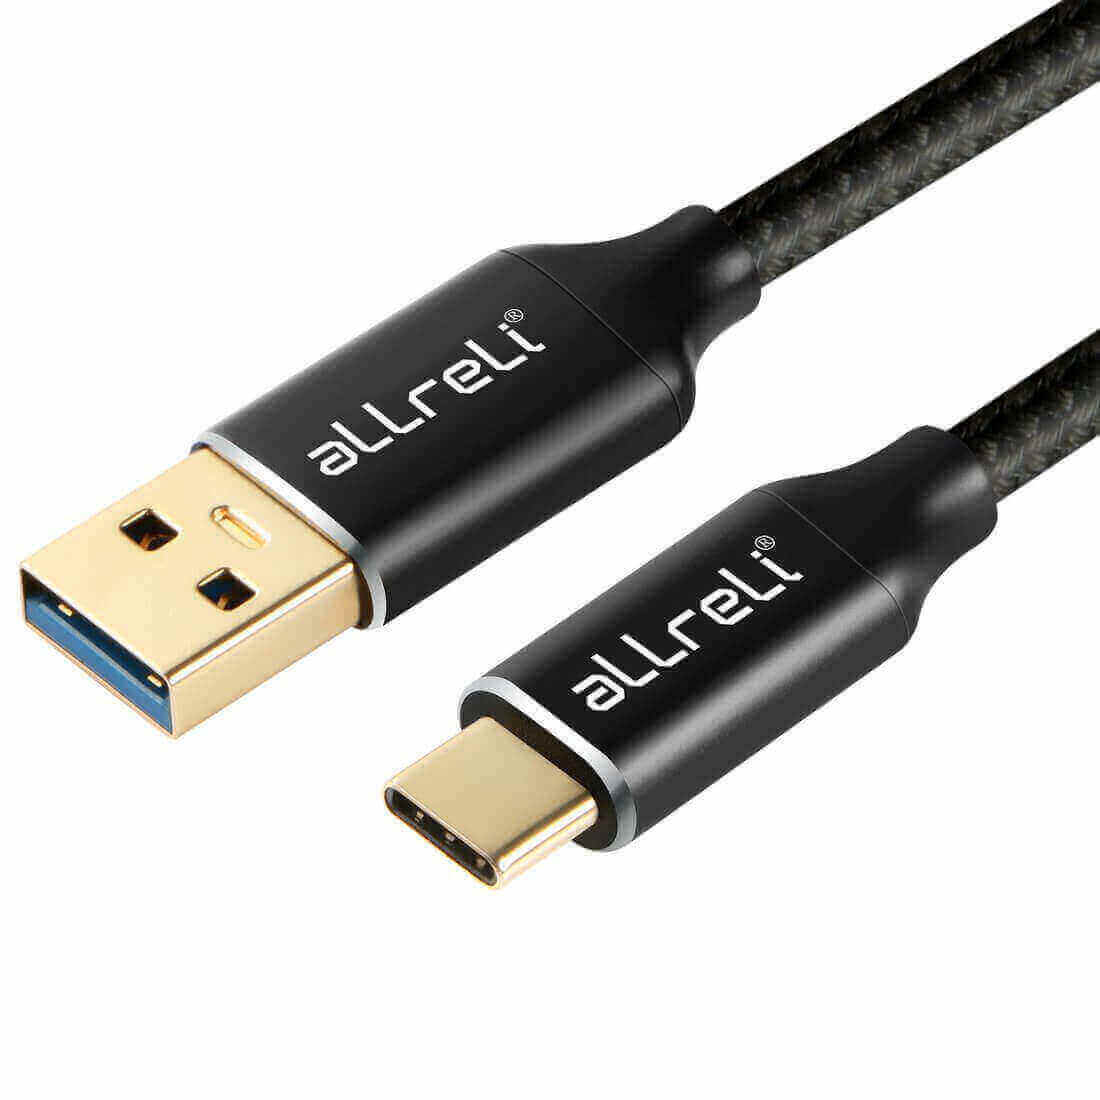 USB Type C Cable, aLLreLi 1.8M USB 3.1 USB-C to Standard Type A USB 3.0 Charger